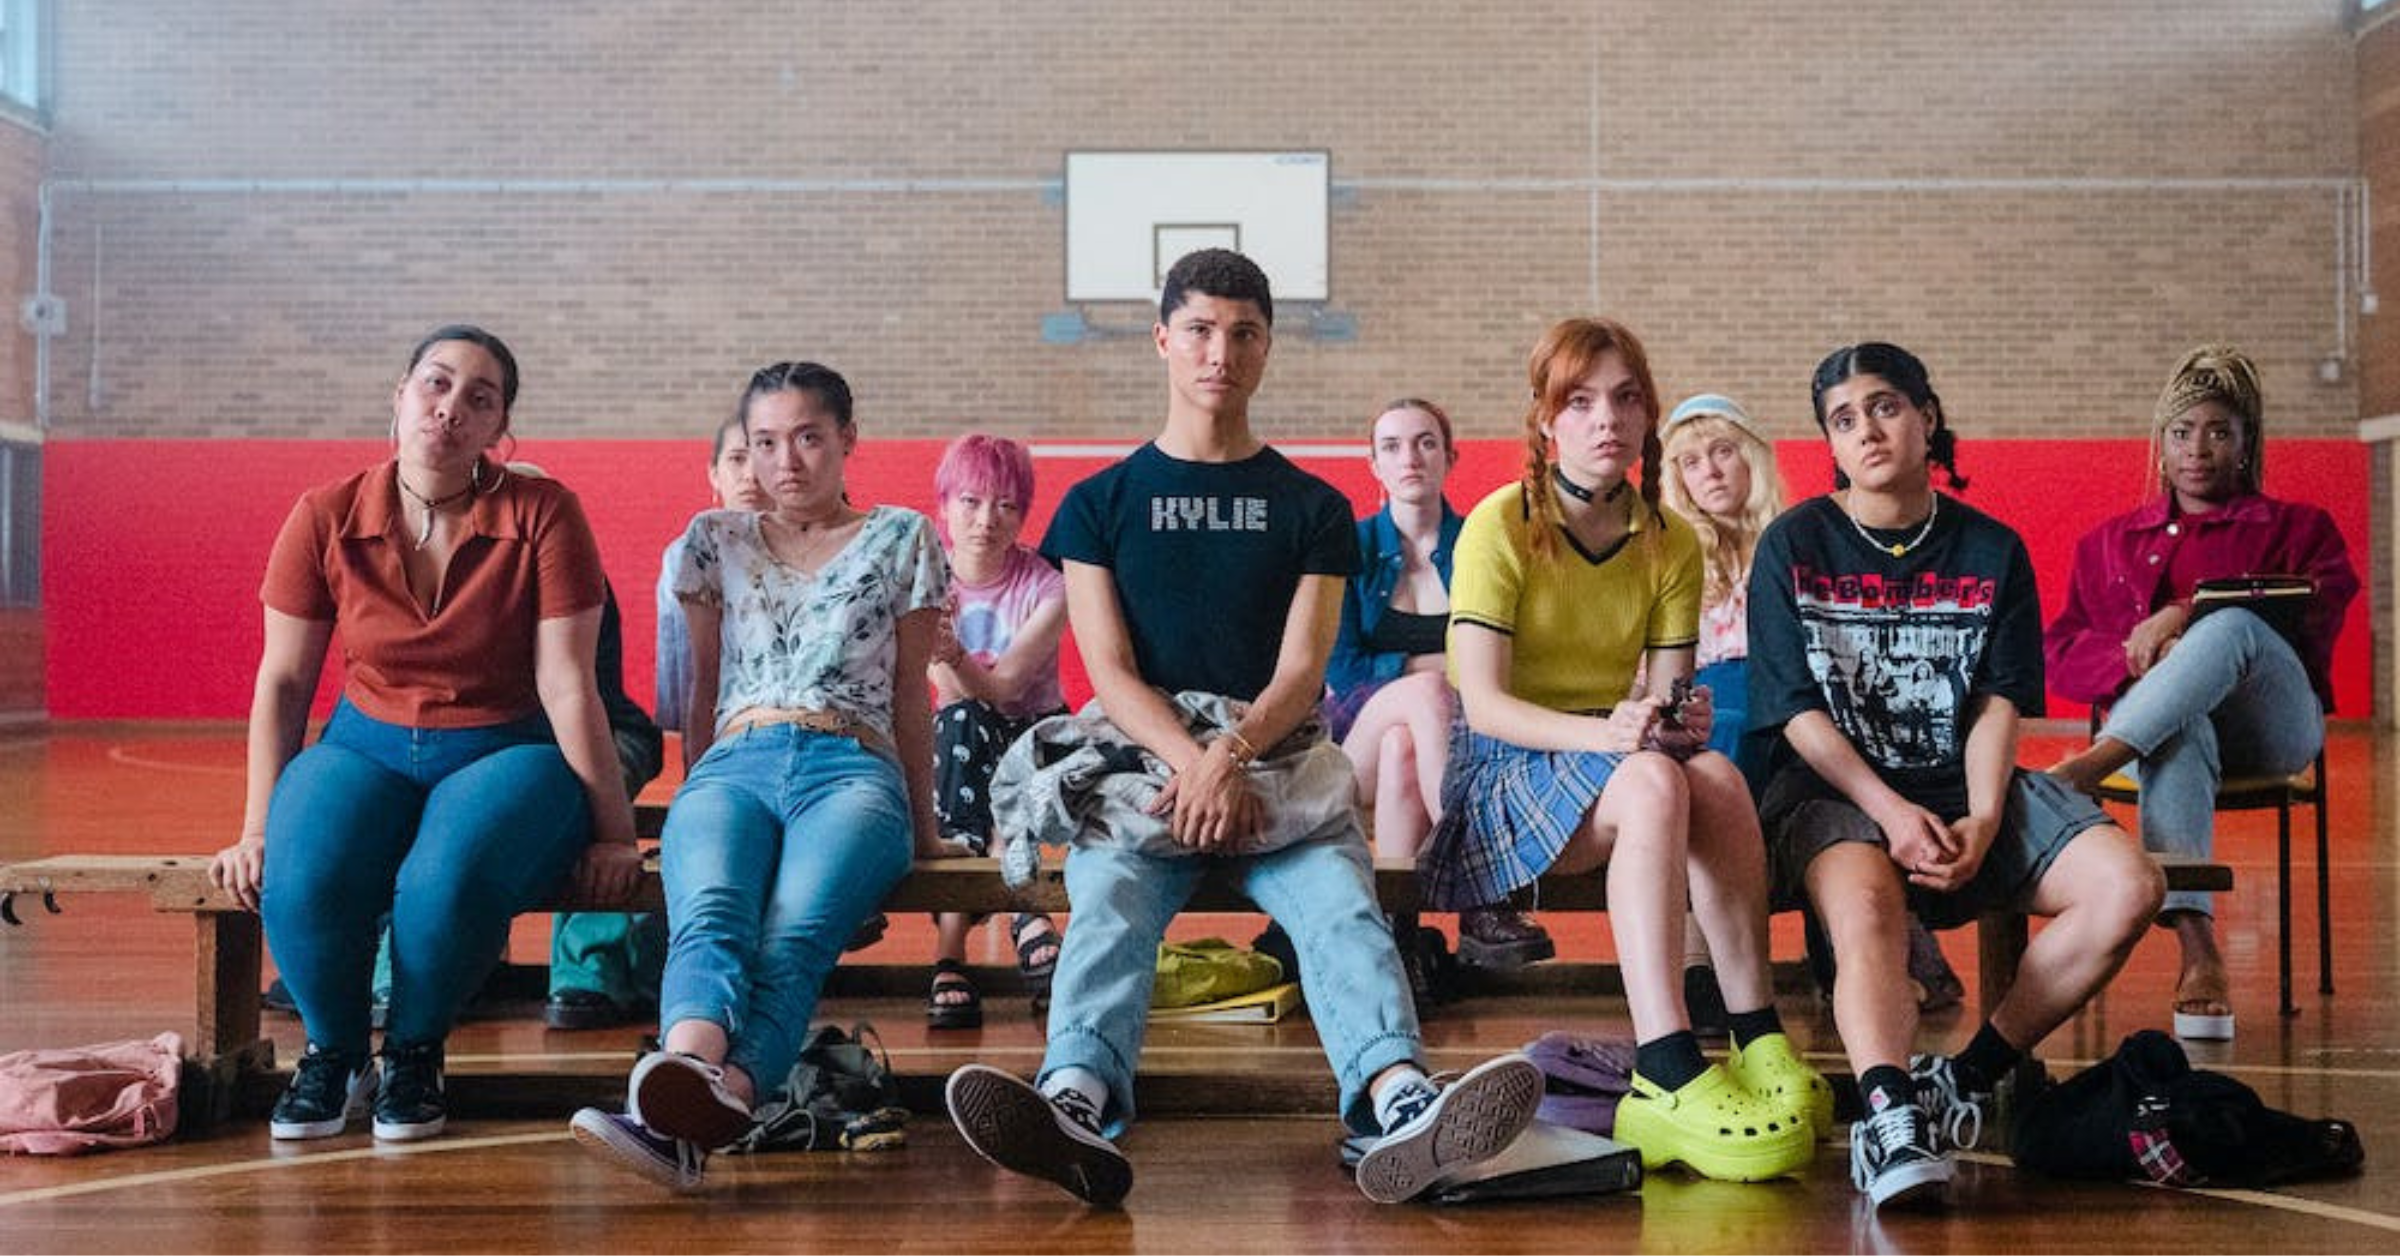 A still image from the Netflix show Heartbreak High shows a group of about a dozen teenagers sitting in their school's basketball court. The character in the middle front is wearing a black T-shirt with the word 'Kylie' emblazoned on the front, as well as light blue denim jeans. To their right is a young woman wearing a yellow top and green crocs. To her right is another woman wearing a black shirt and sneakers.